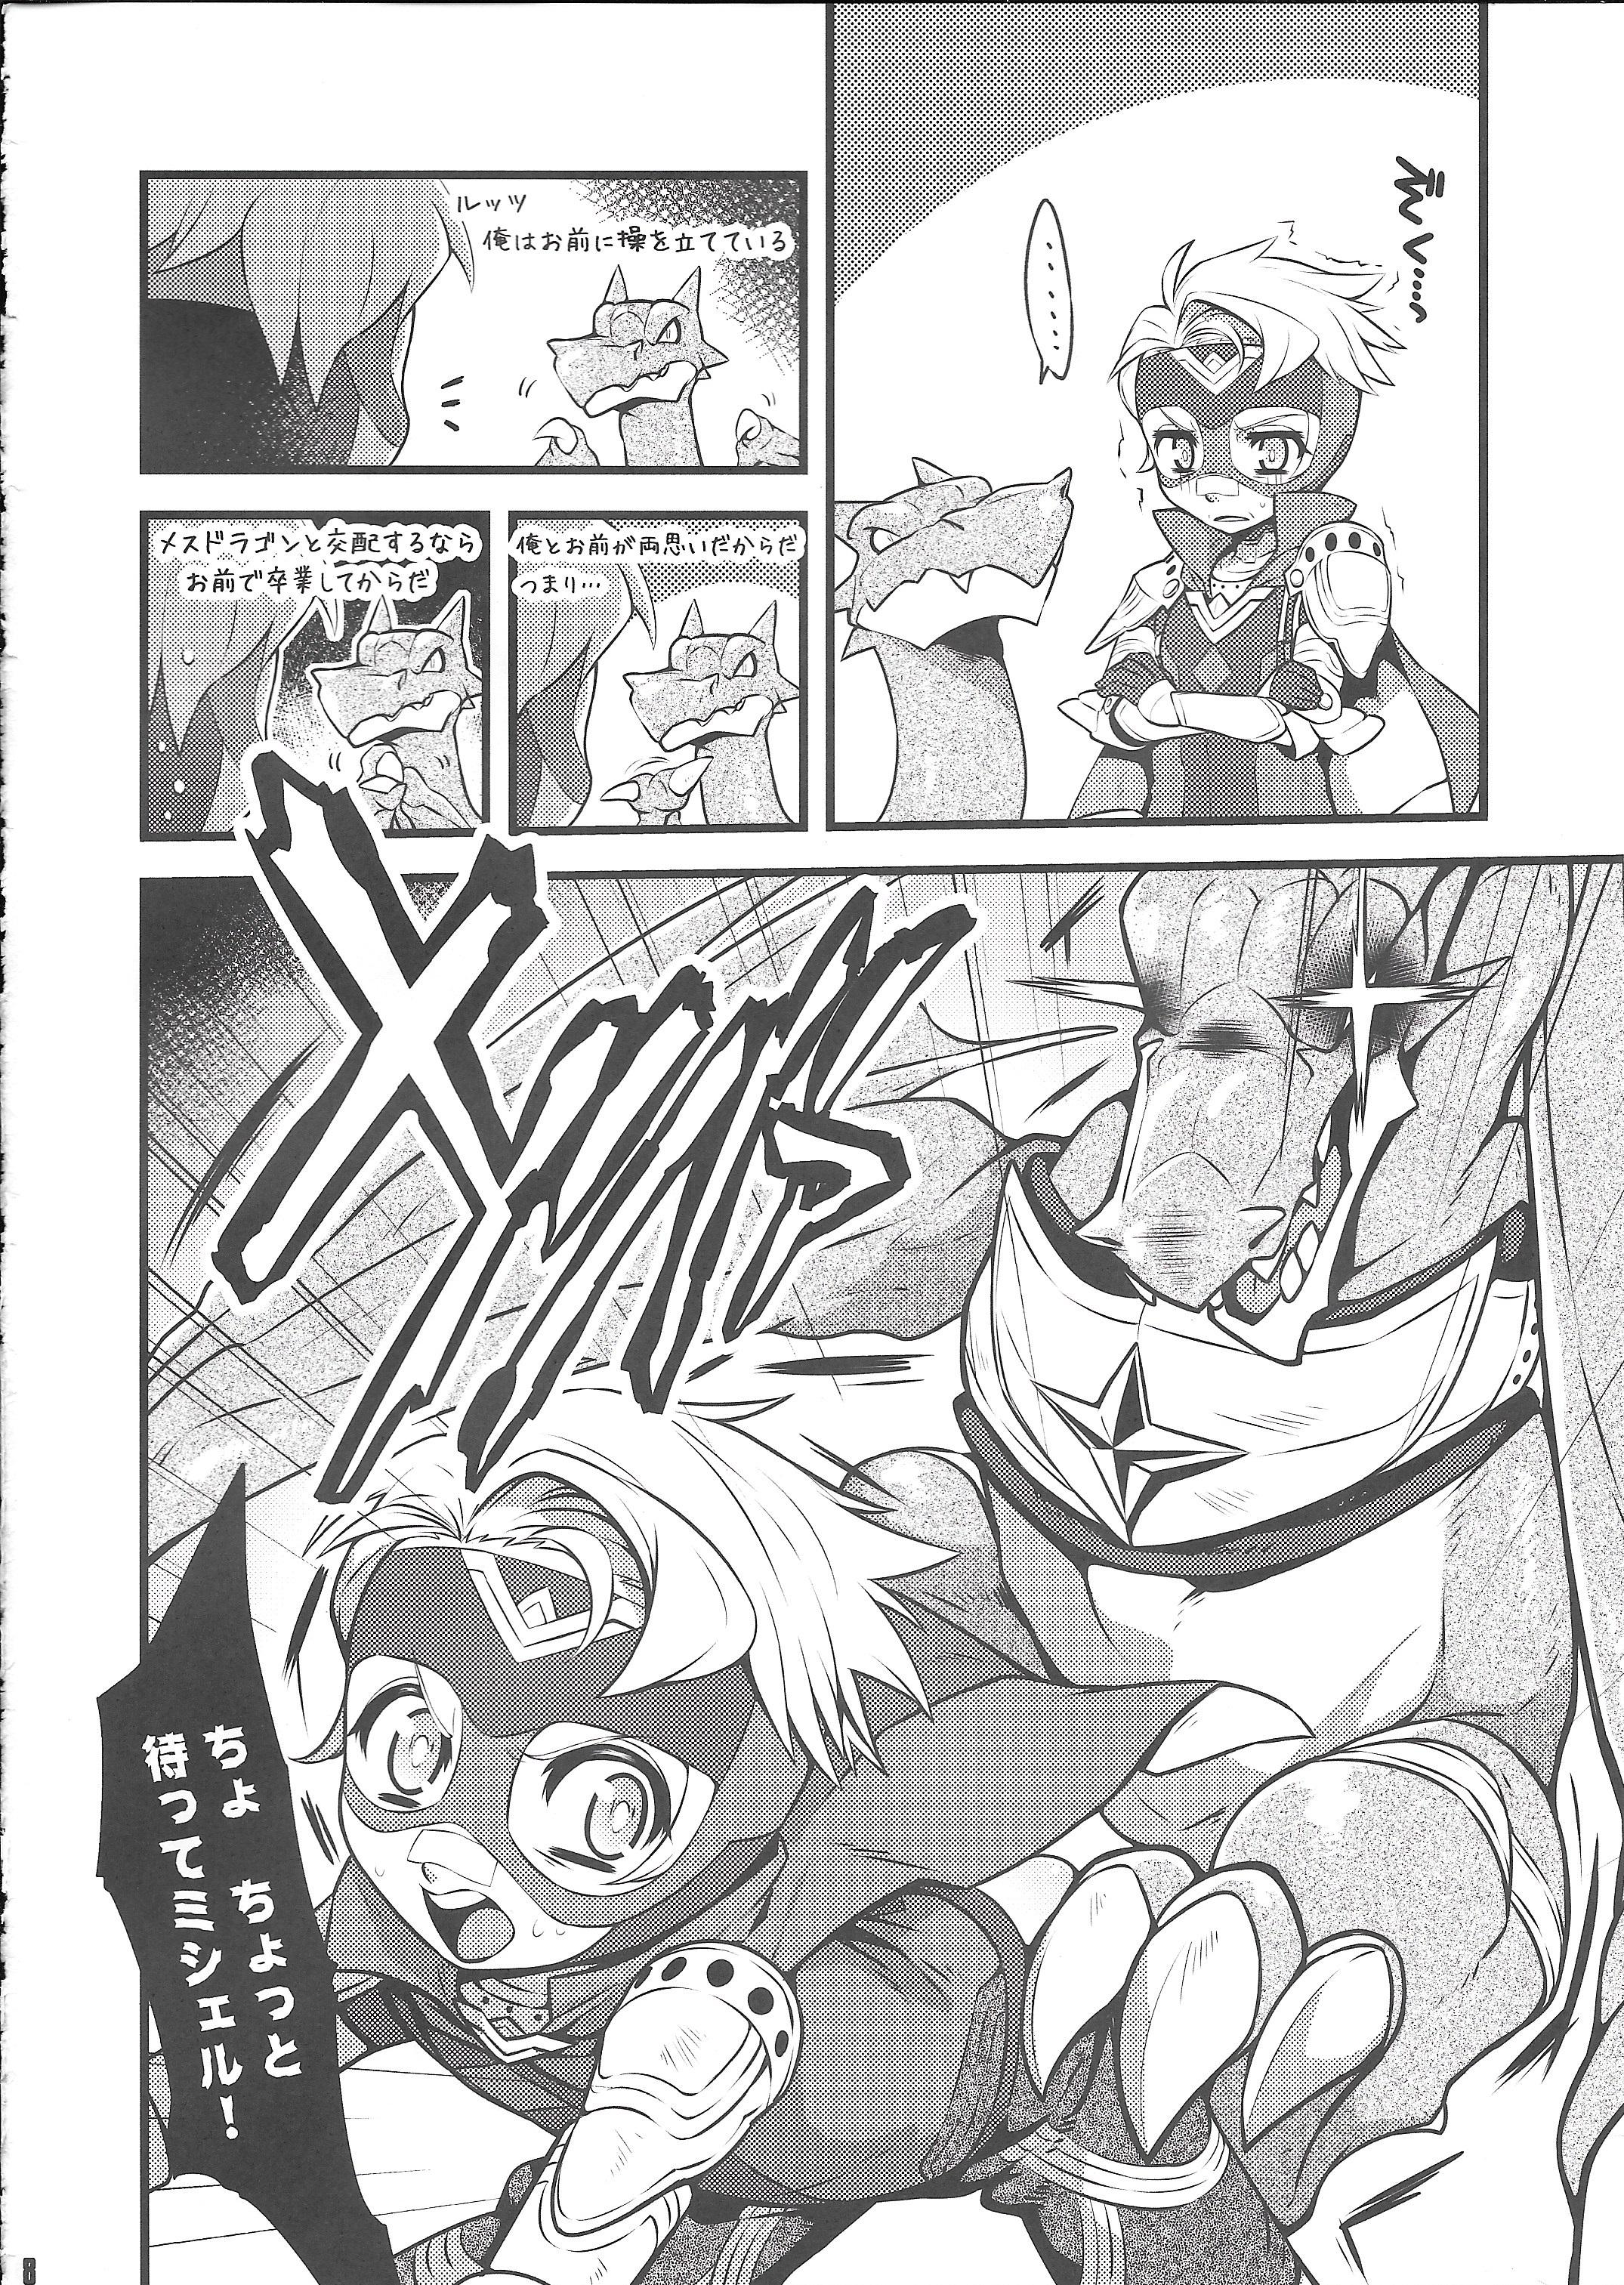 Teenxxx September 5 to 8 - Fire emblem if Toy - Page 7